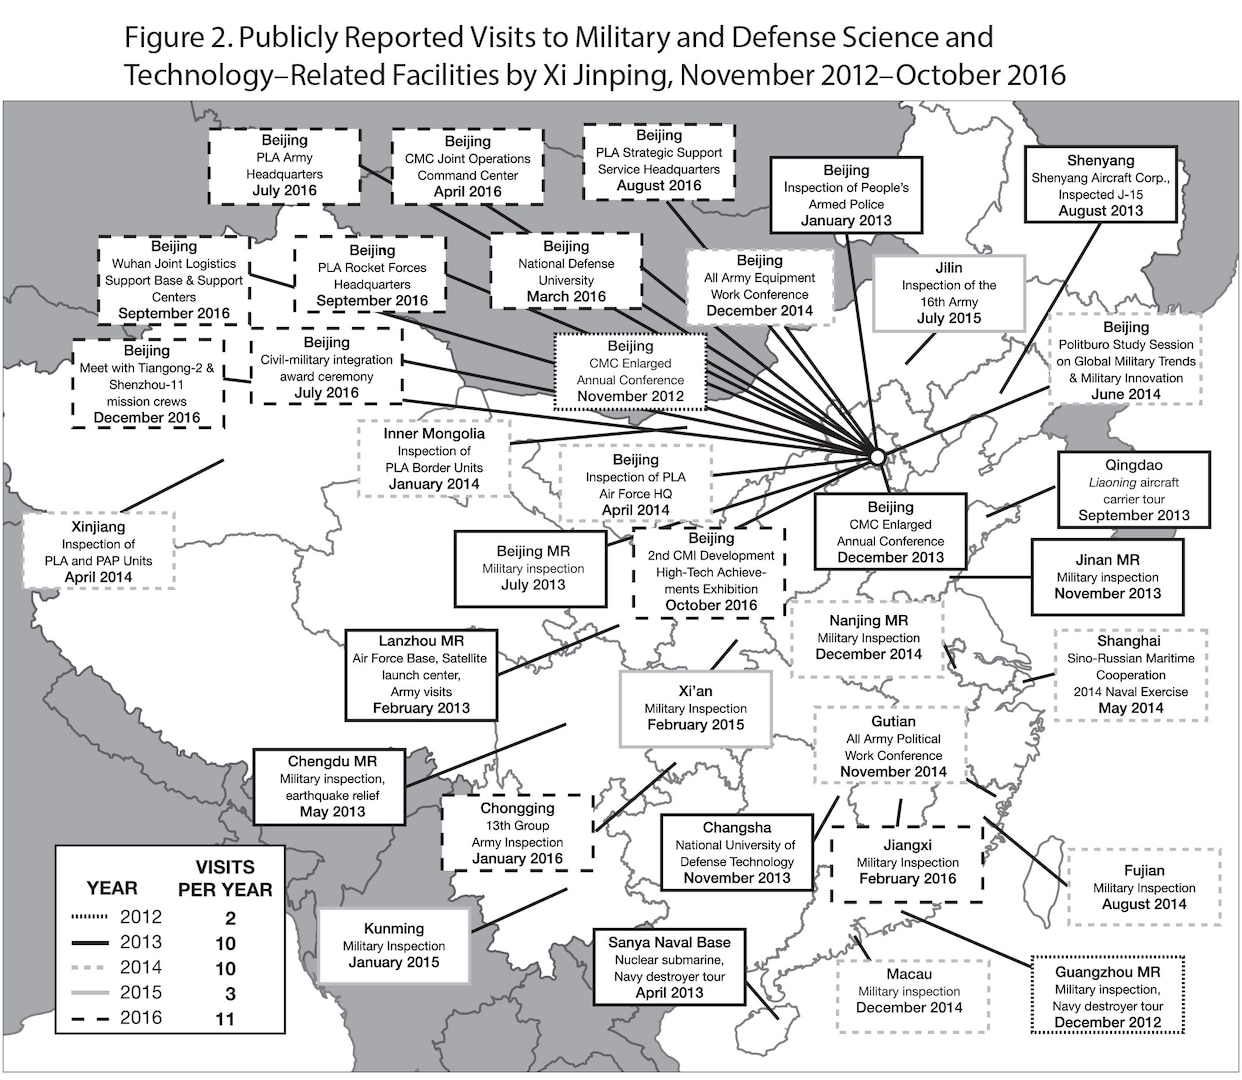 Figure 2. Publicly Reported Visits to Military and Defense Science and Technology–Related Facilities by Xi Jinping, November 2012–October 2016